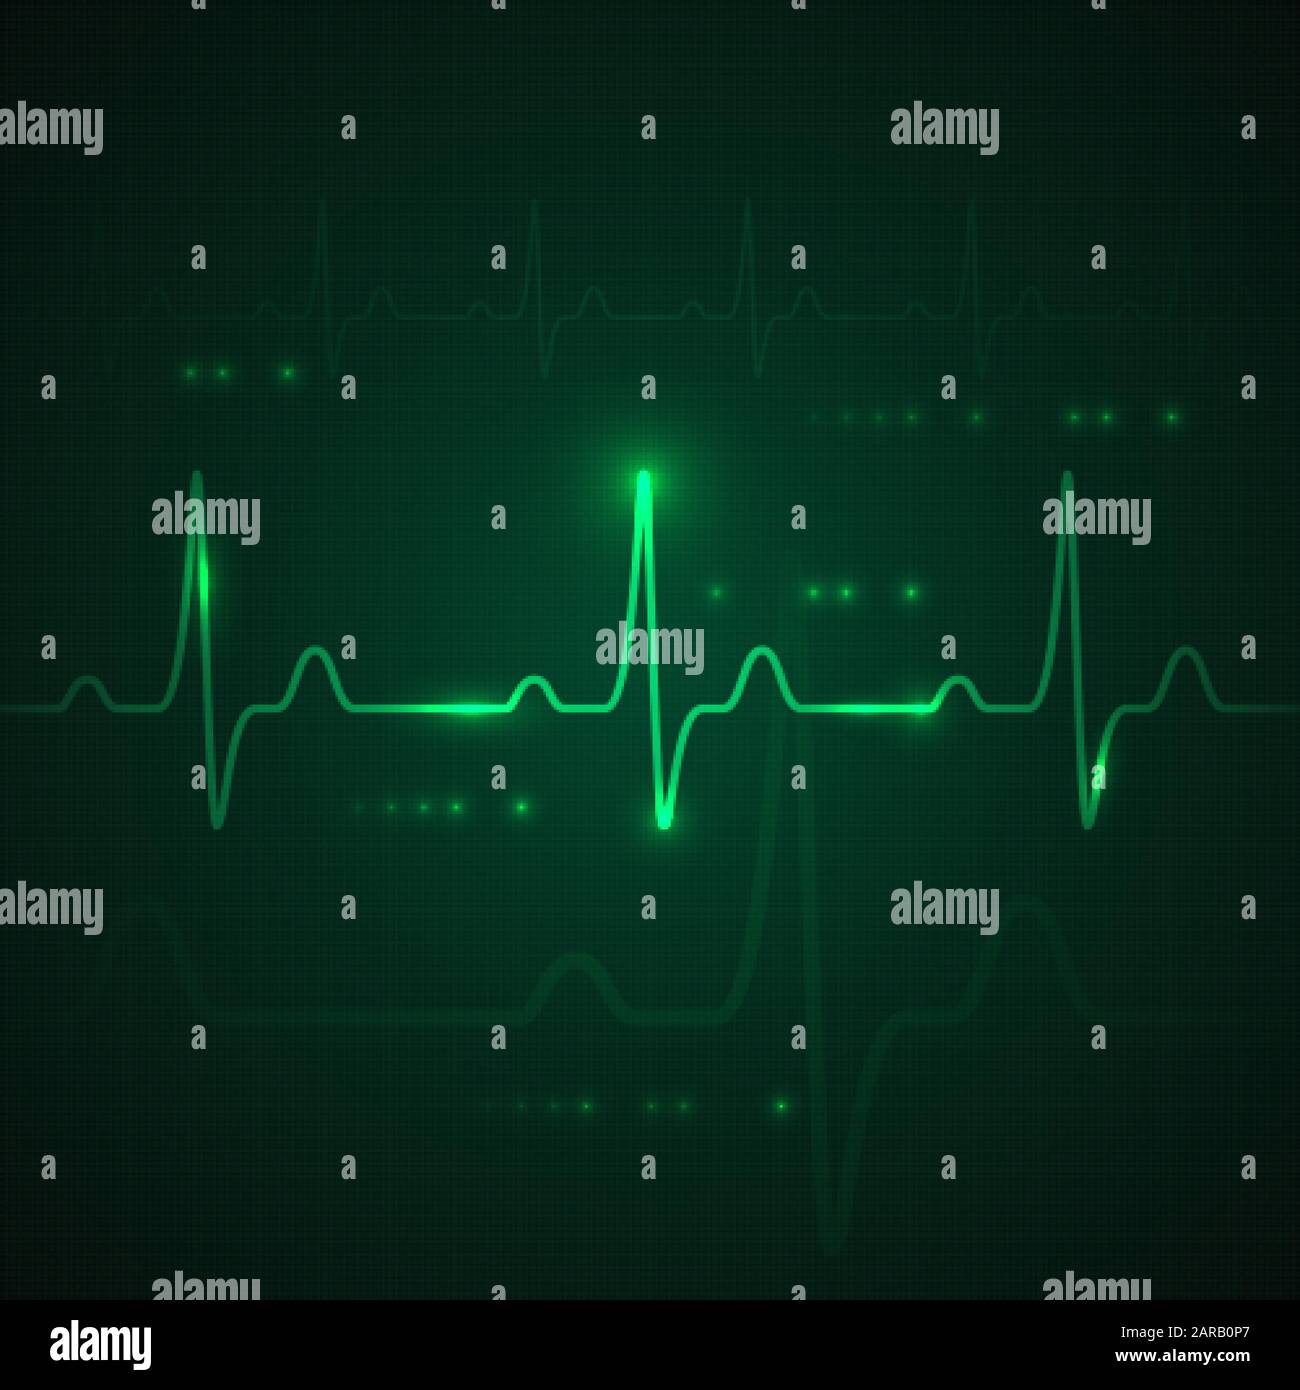 Heart pulse on green display. heartbeat graphic or cardiogram. Hospital monitoring stress rate. Vector Stock Vector